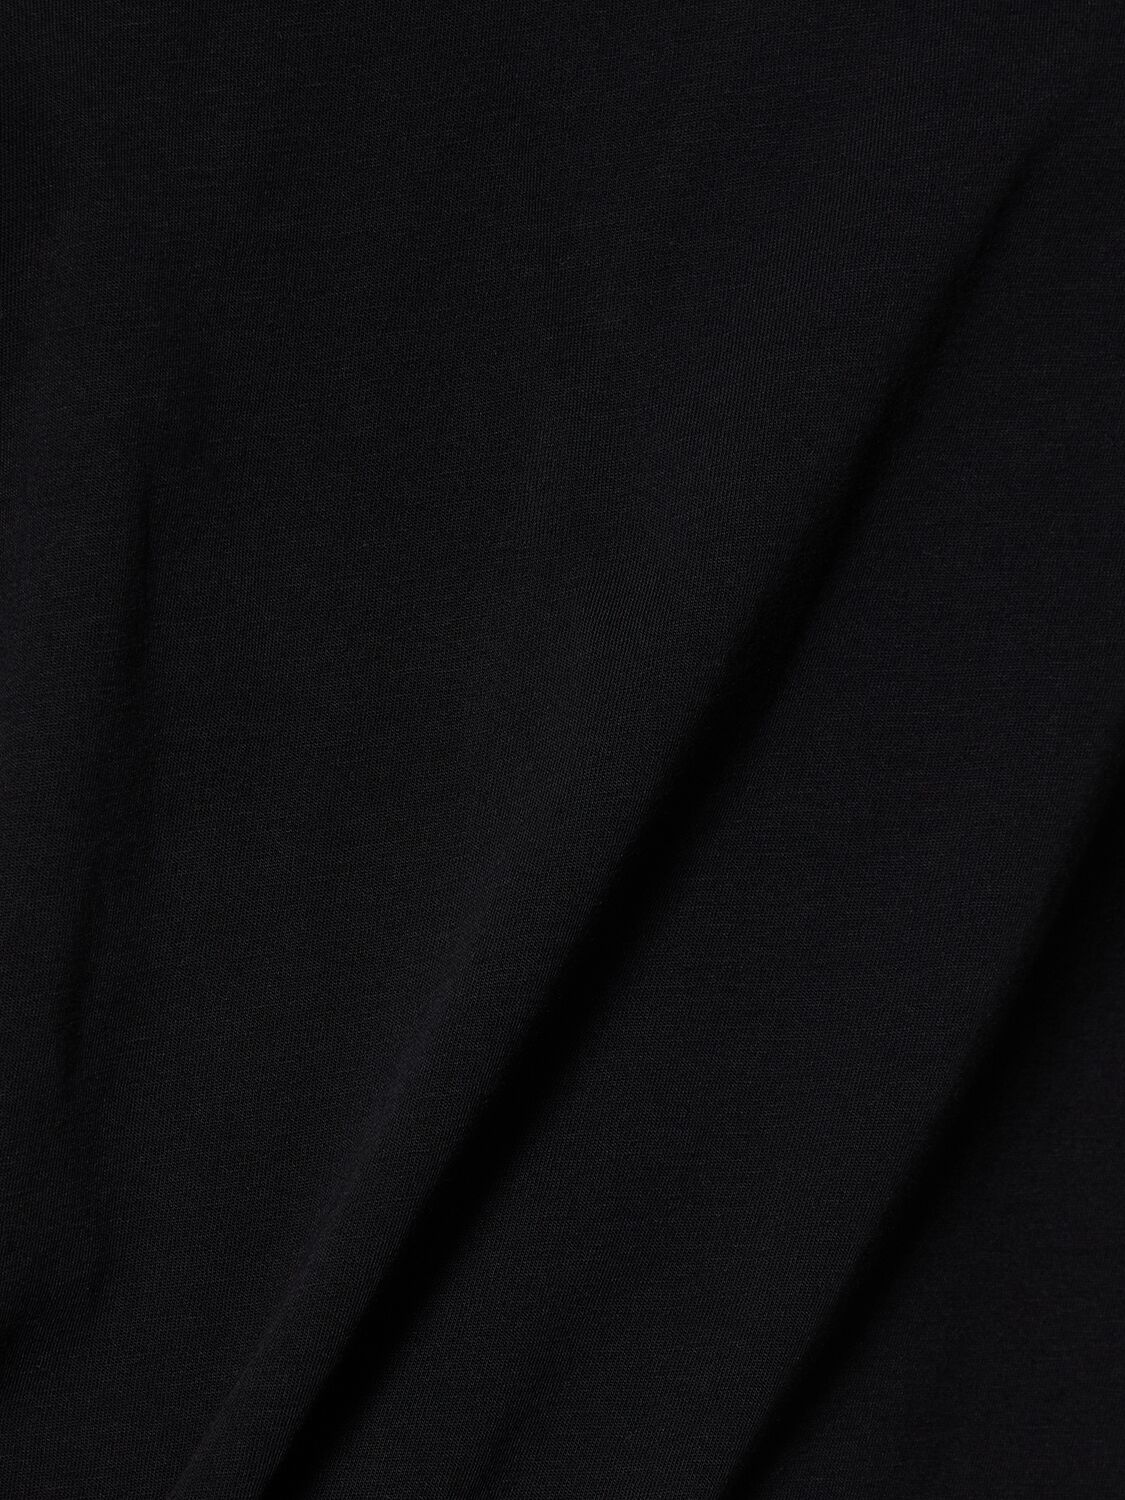 Shop Our Legacy New Box Cotton Jersey T-shirt In Black